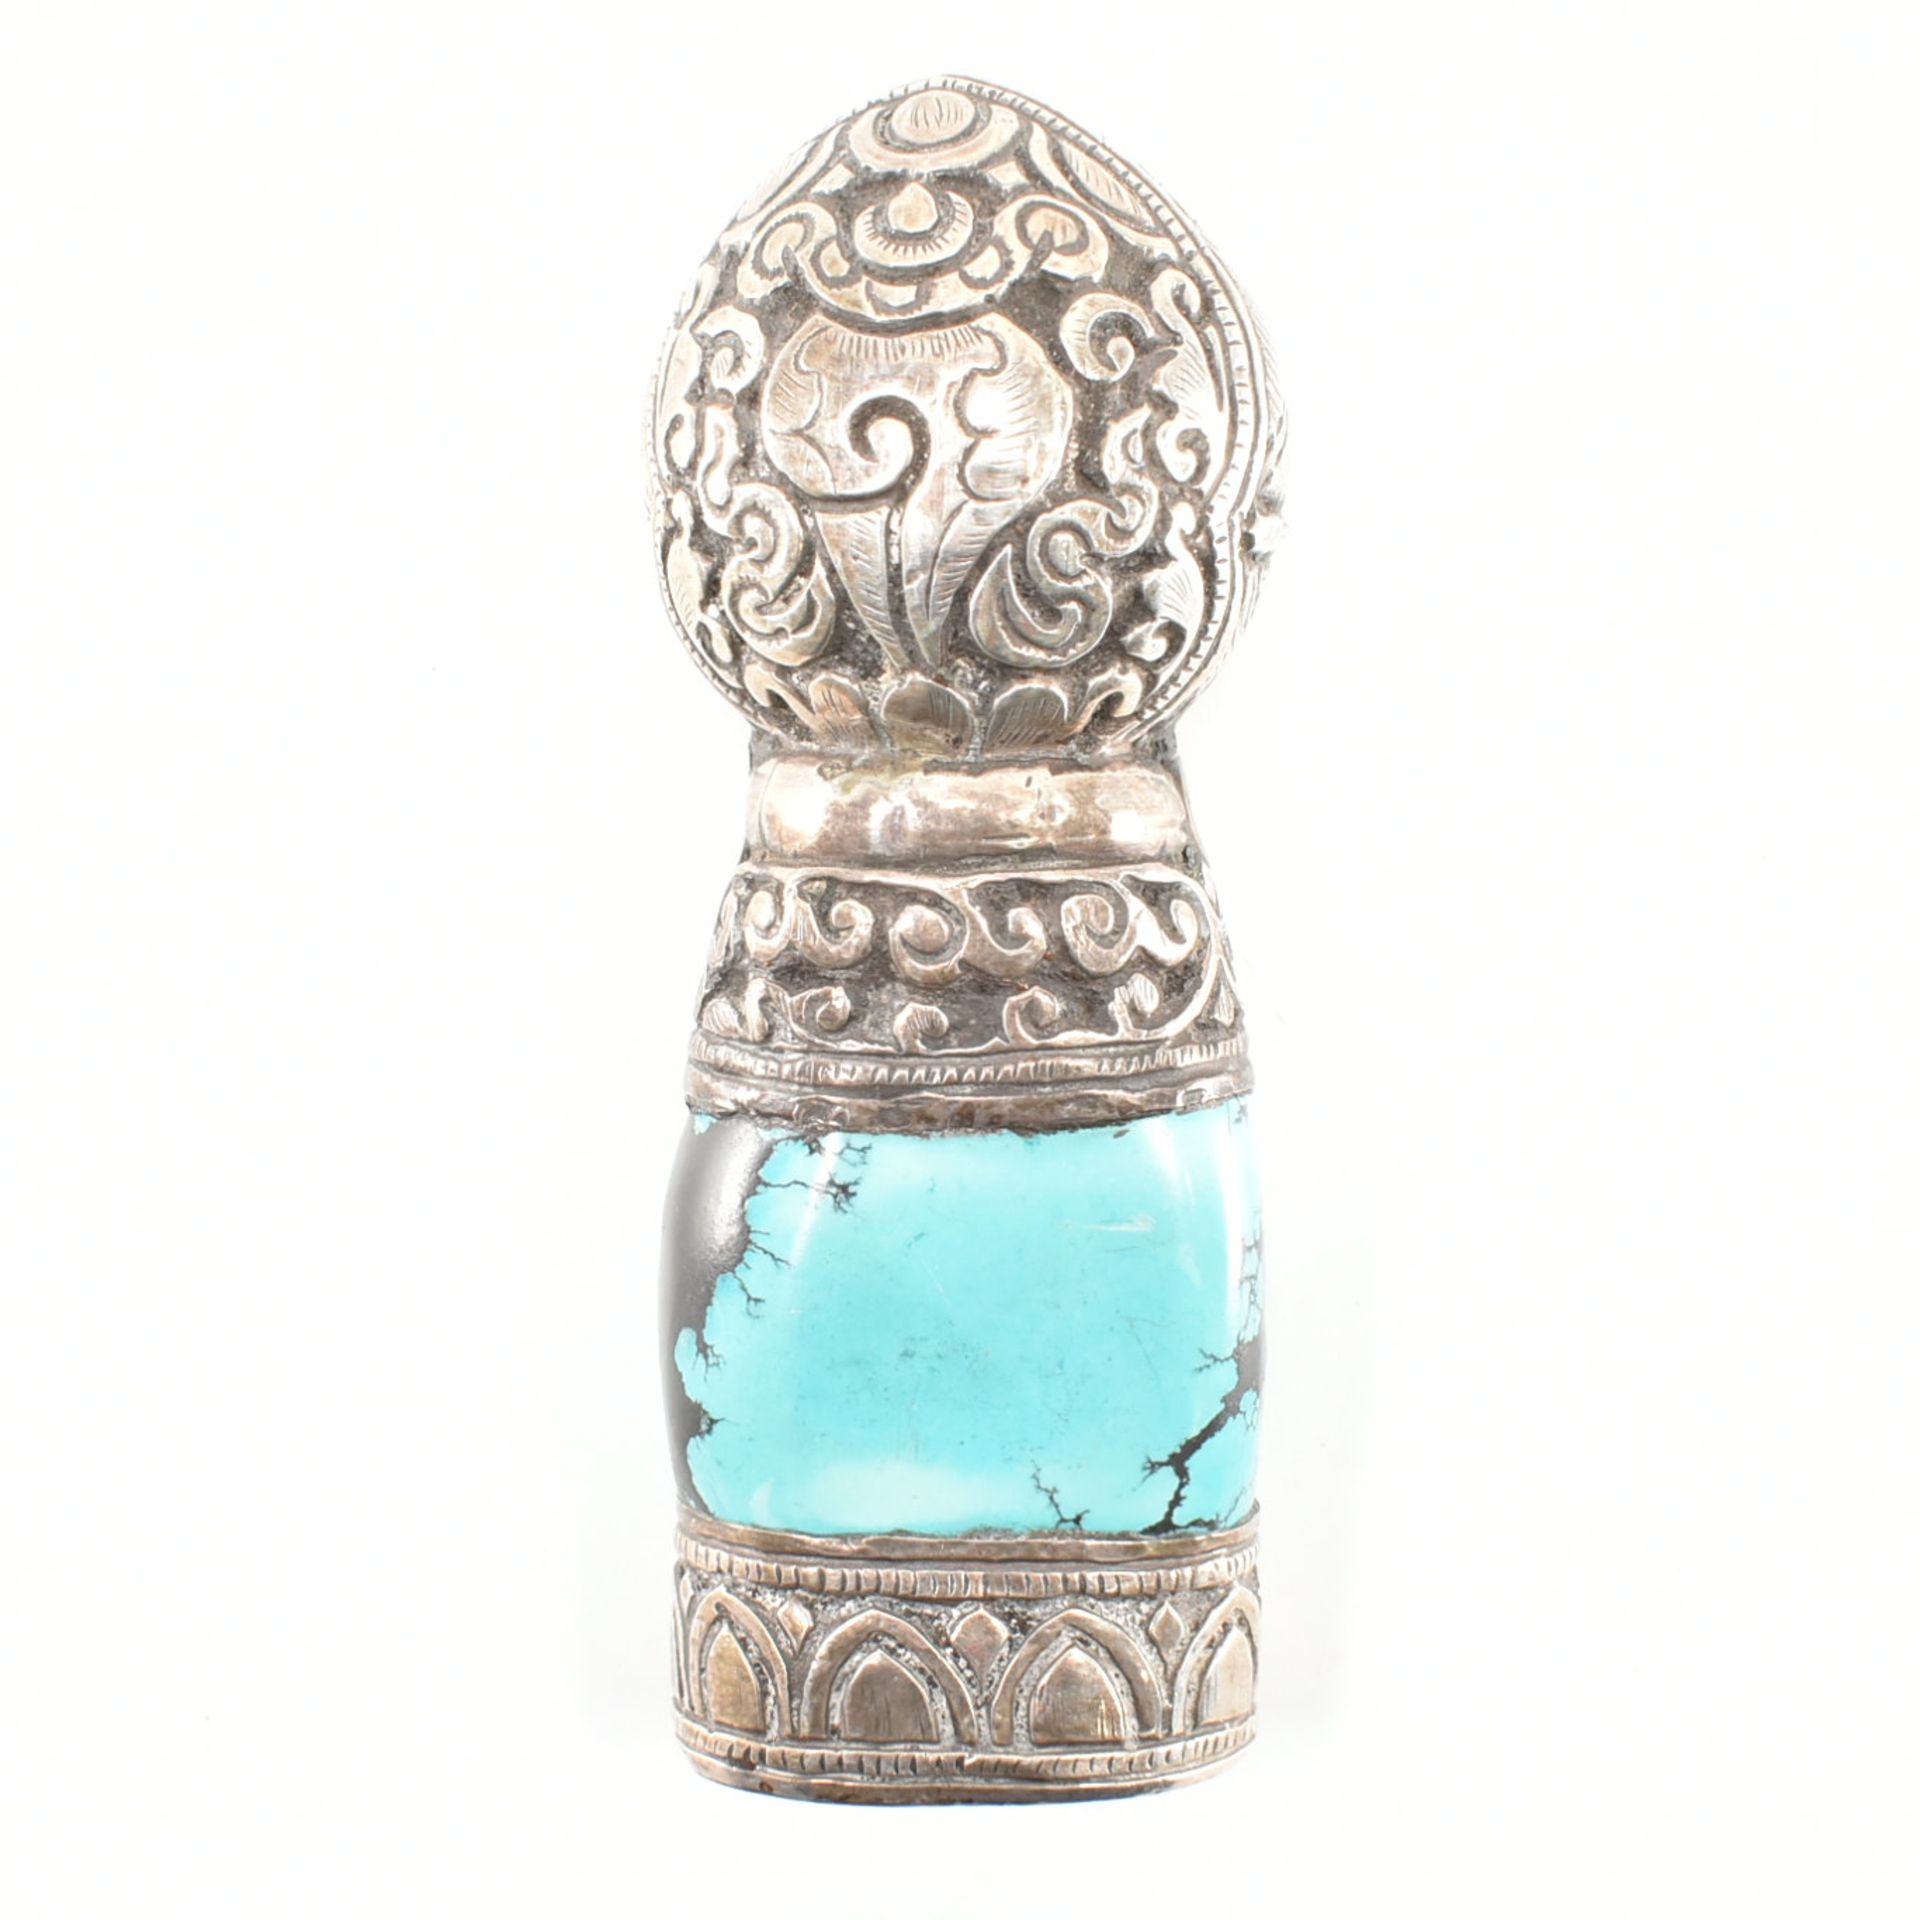 TIBETAN SILVER & TURQUOISE PERSONAL SEAL - Image 2 of 7